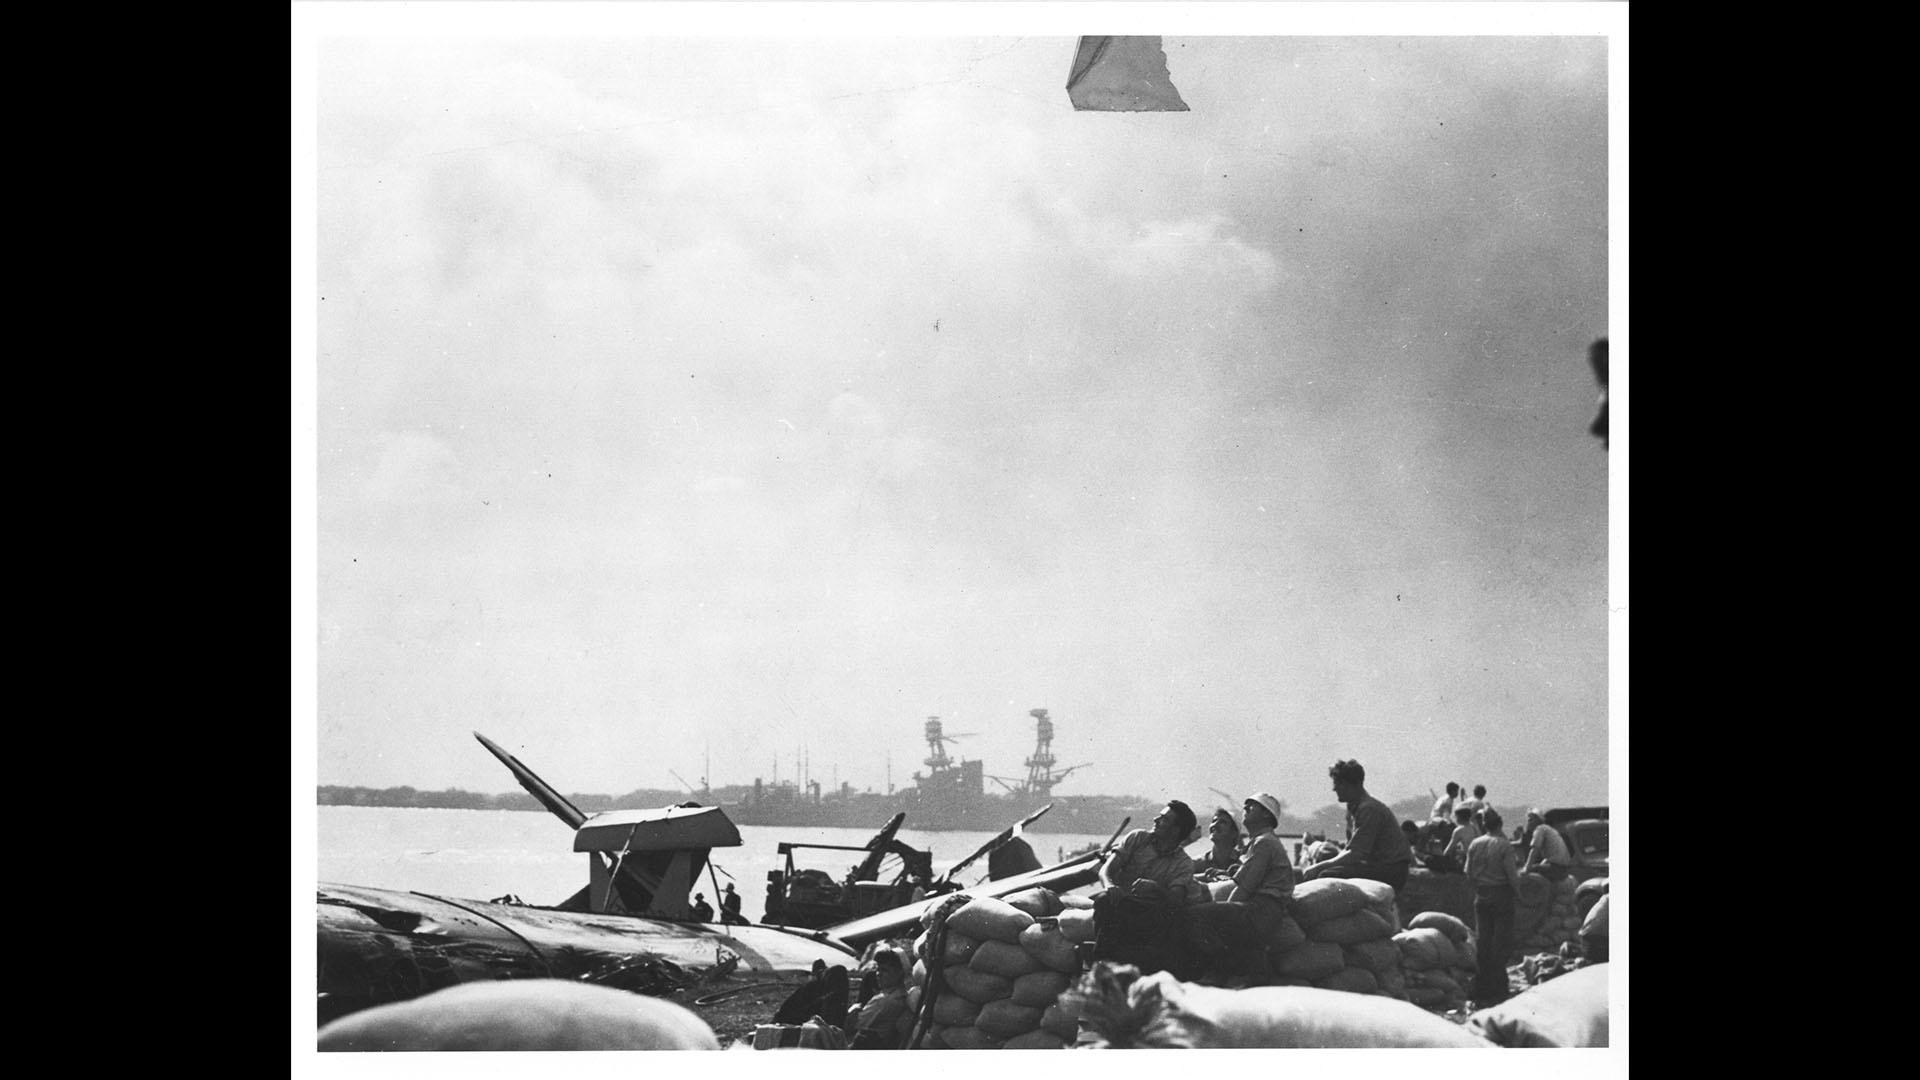 Photograph of gun crews during the Japanese attack on Pearl Harbor.